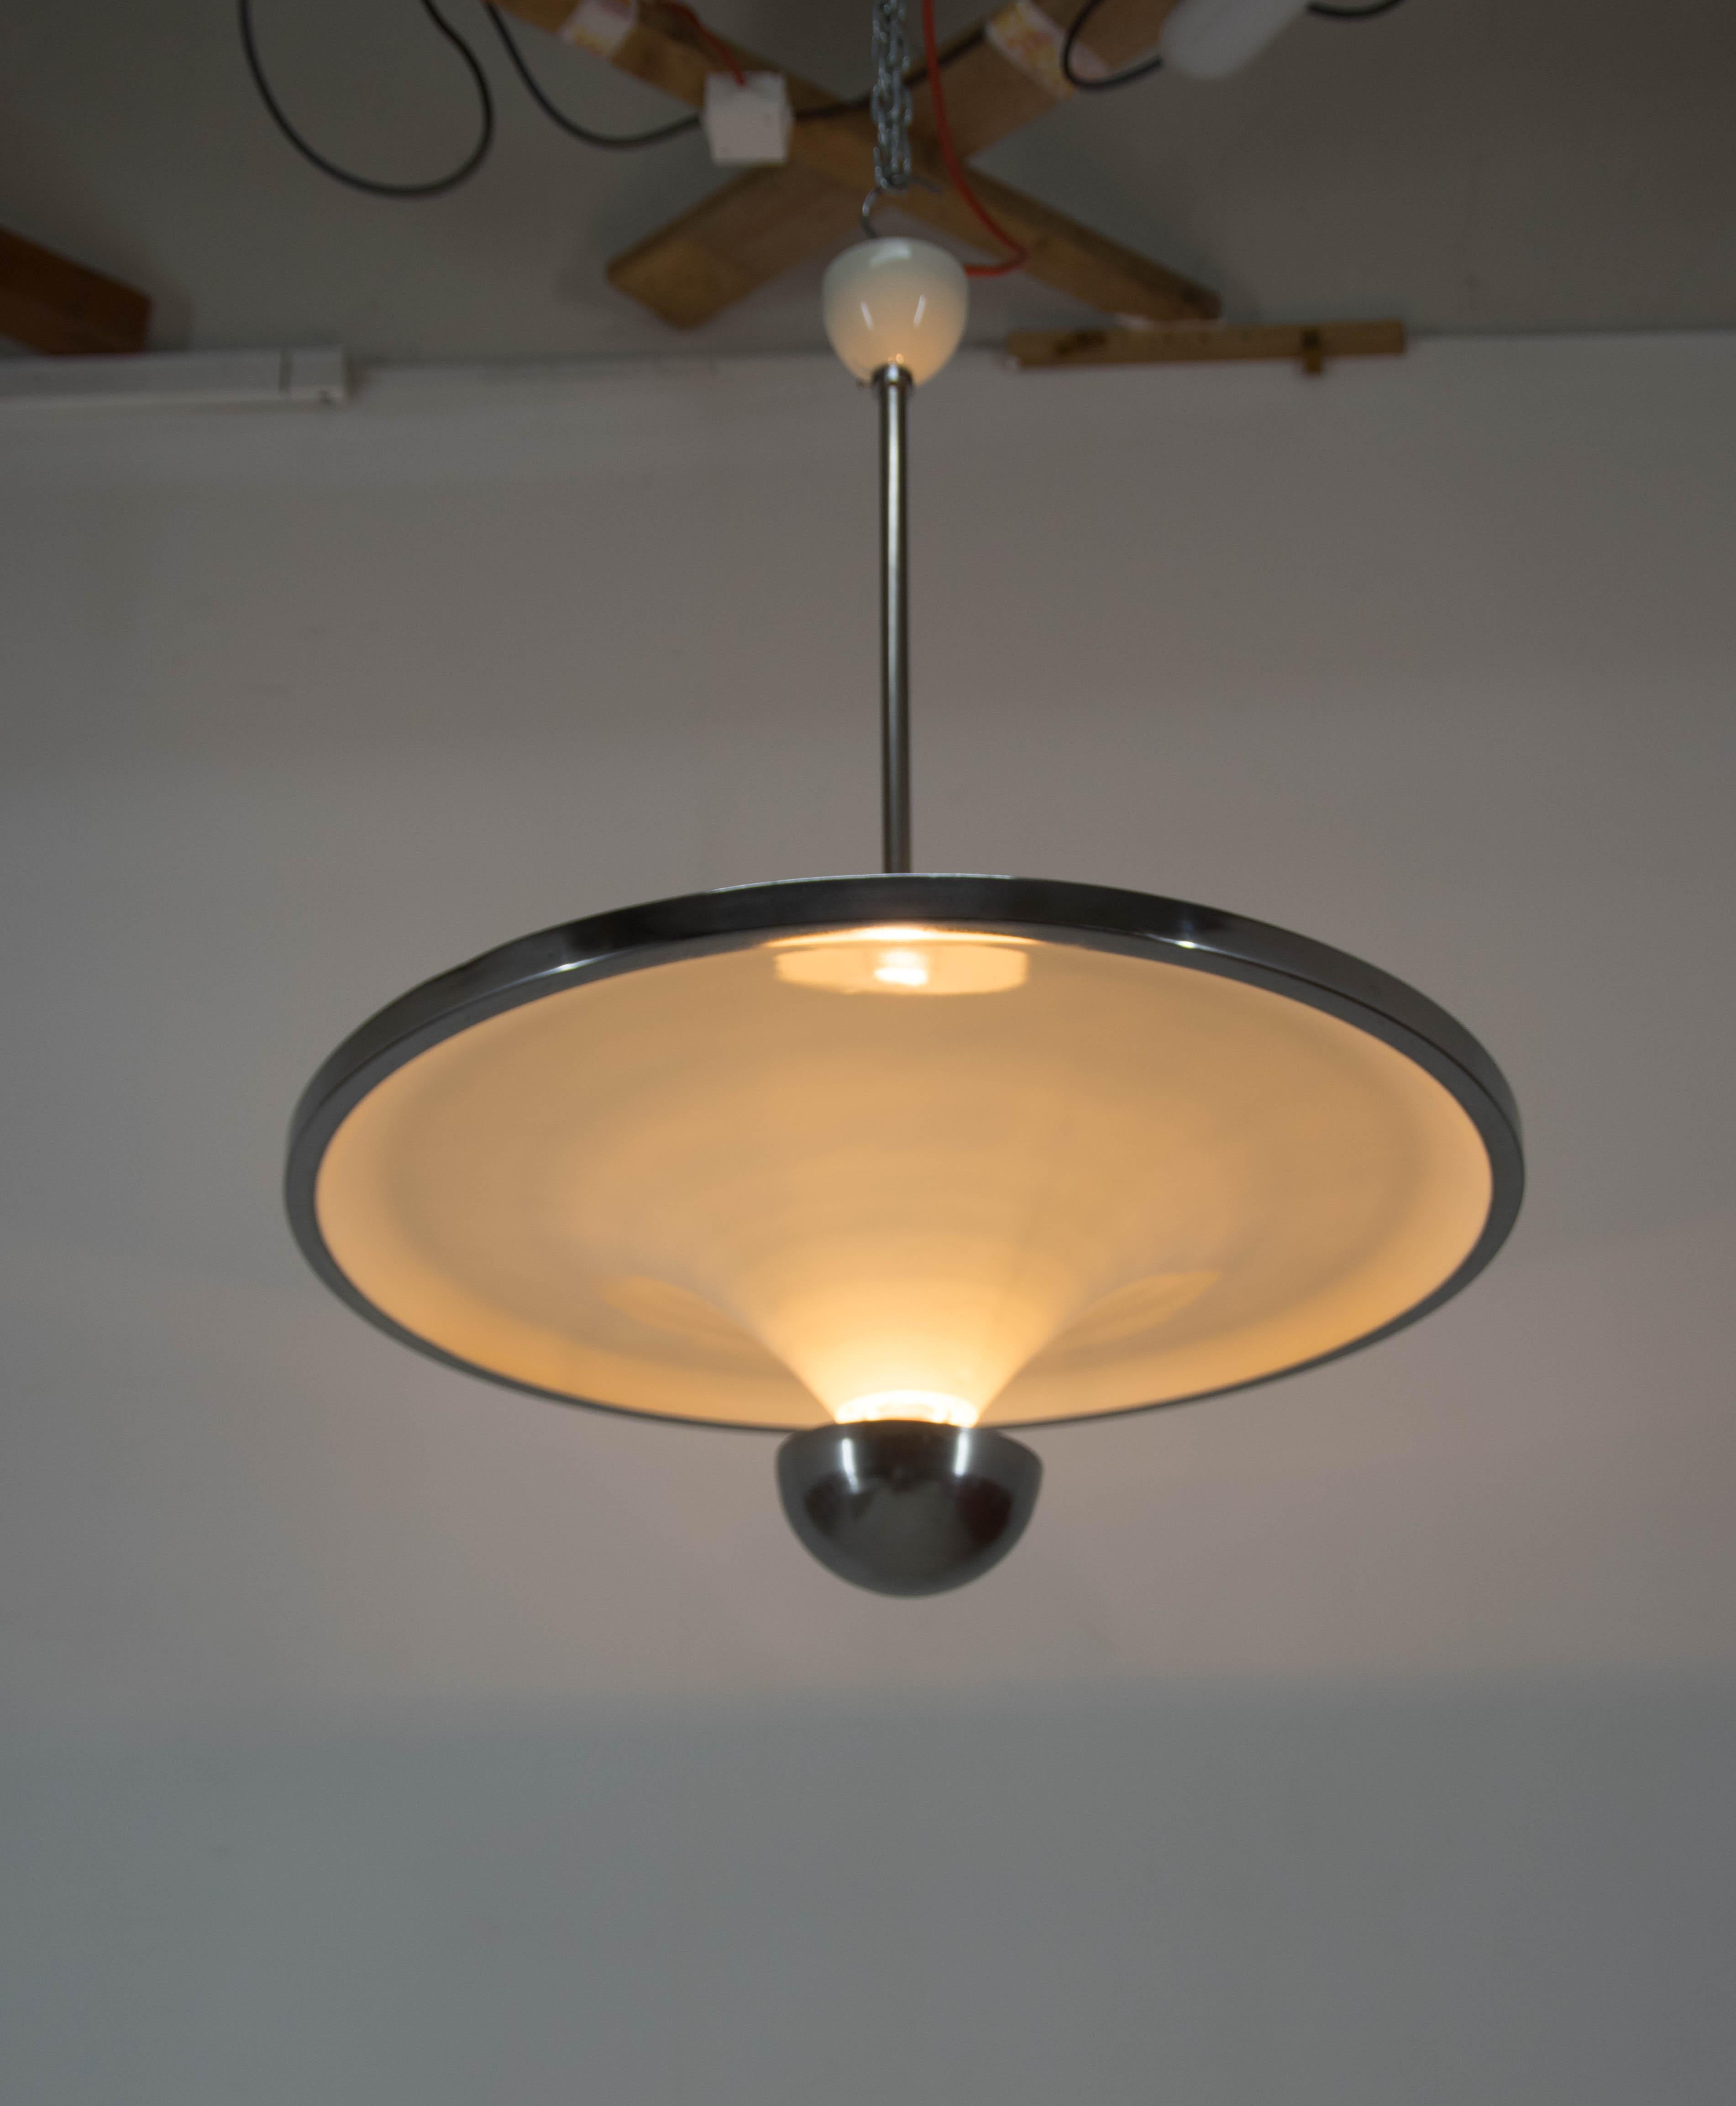 Rare Bauhaus Chandelier with Indirect Light by IAS, 1920s For Sale 5